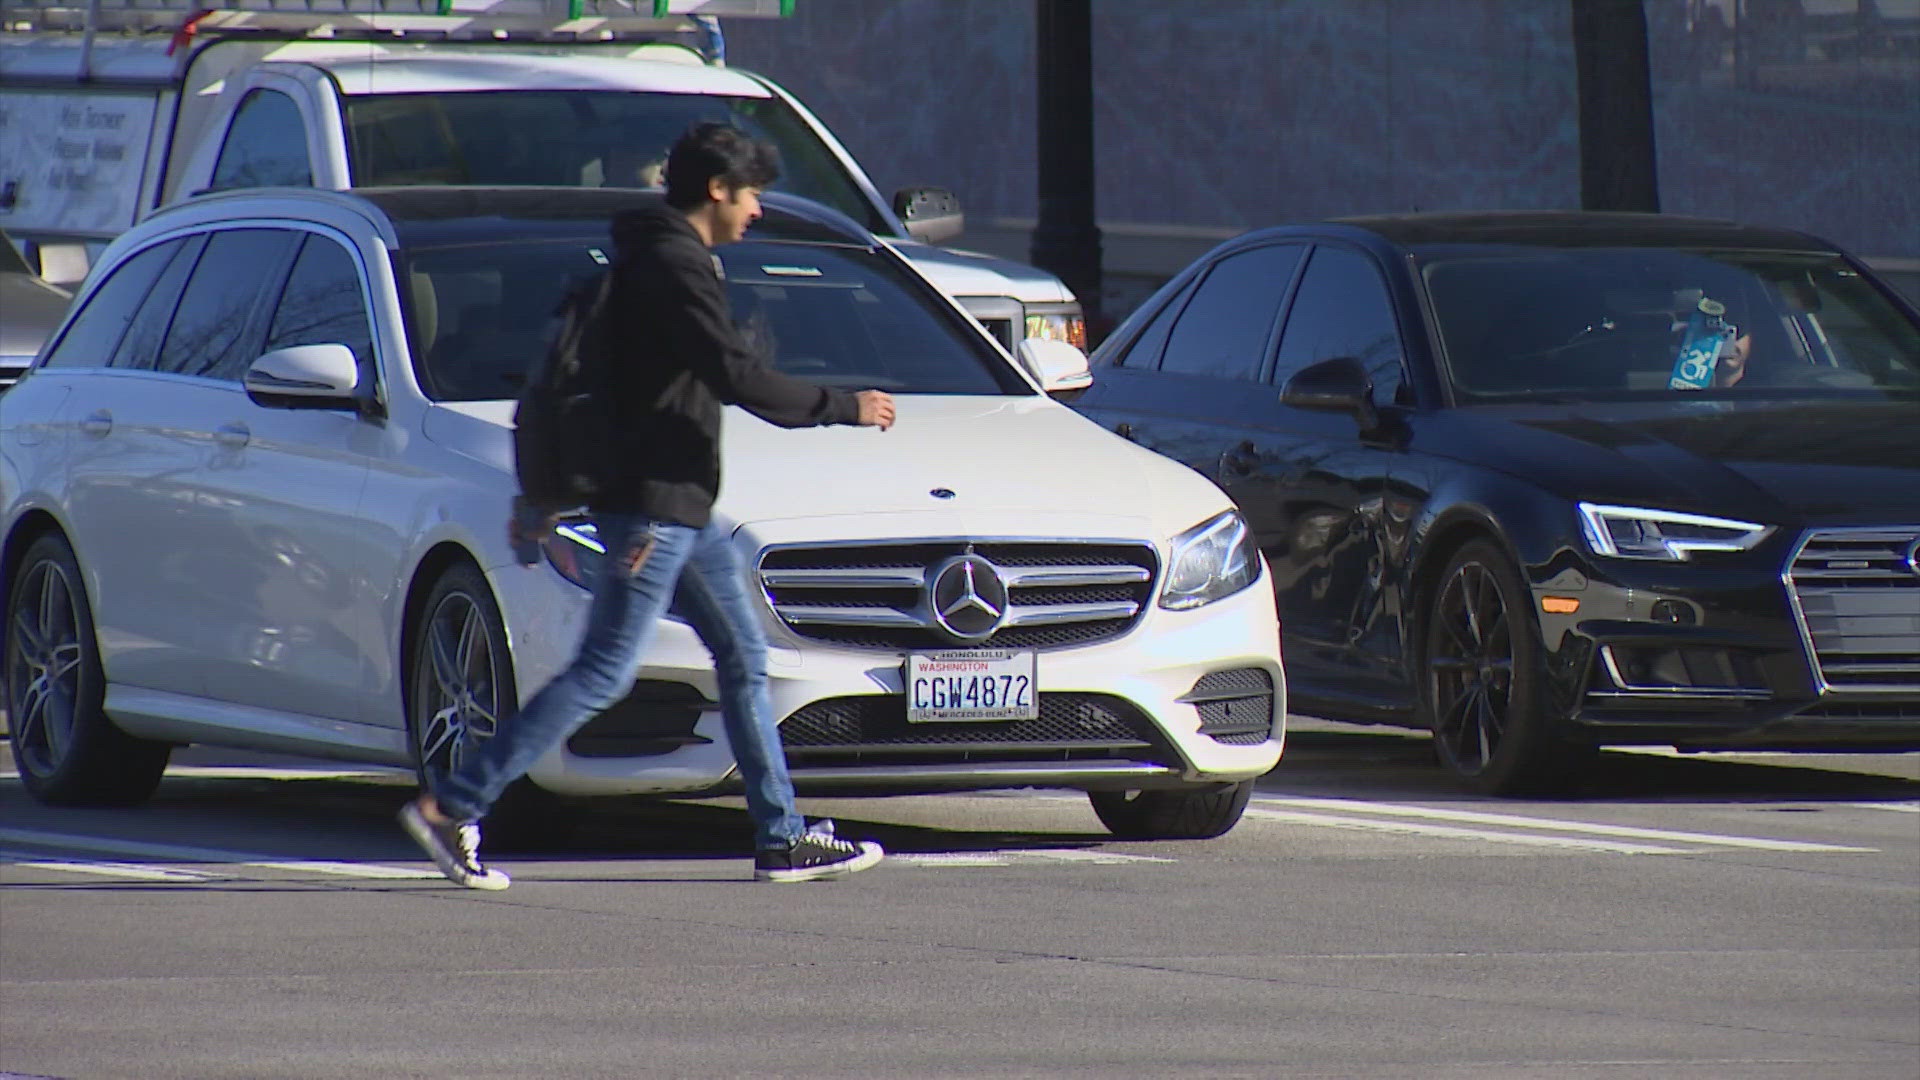 Cars blocking intersections in Seattle create a dangerous scenario for pedestrians trying to cross